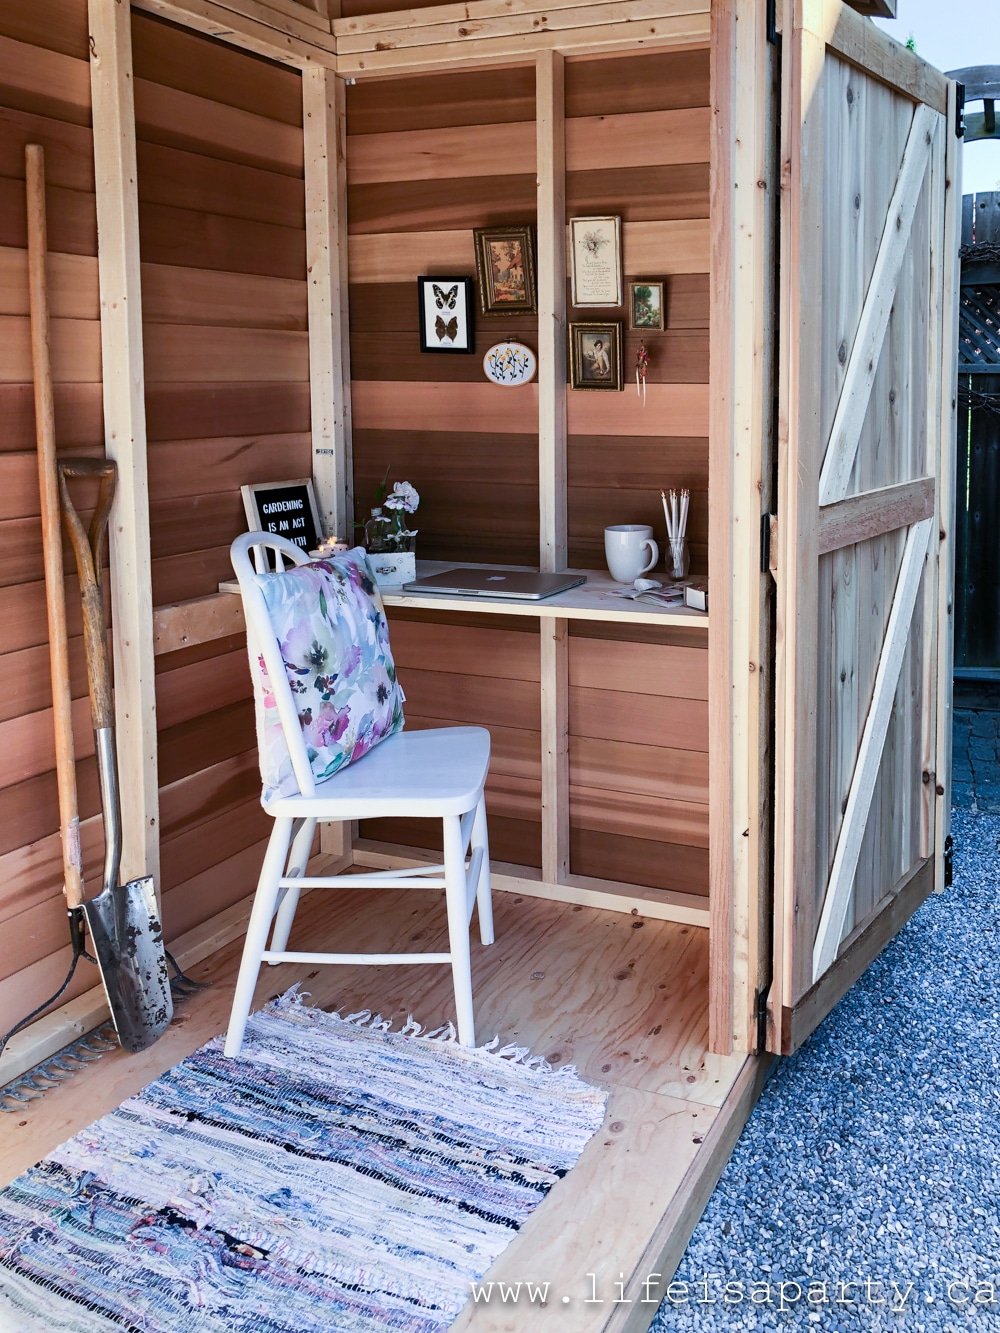 garden shed work space home office